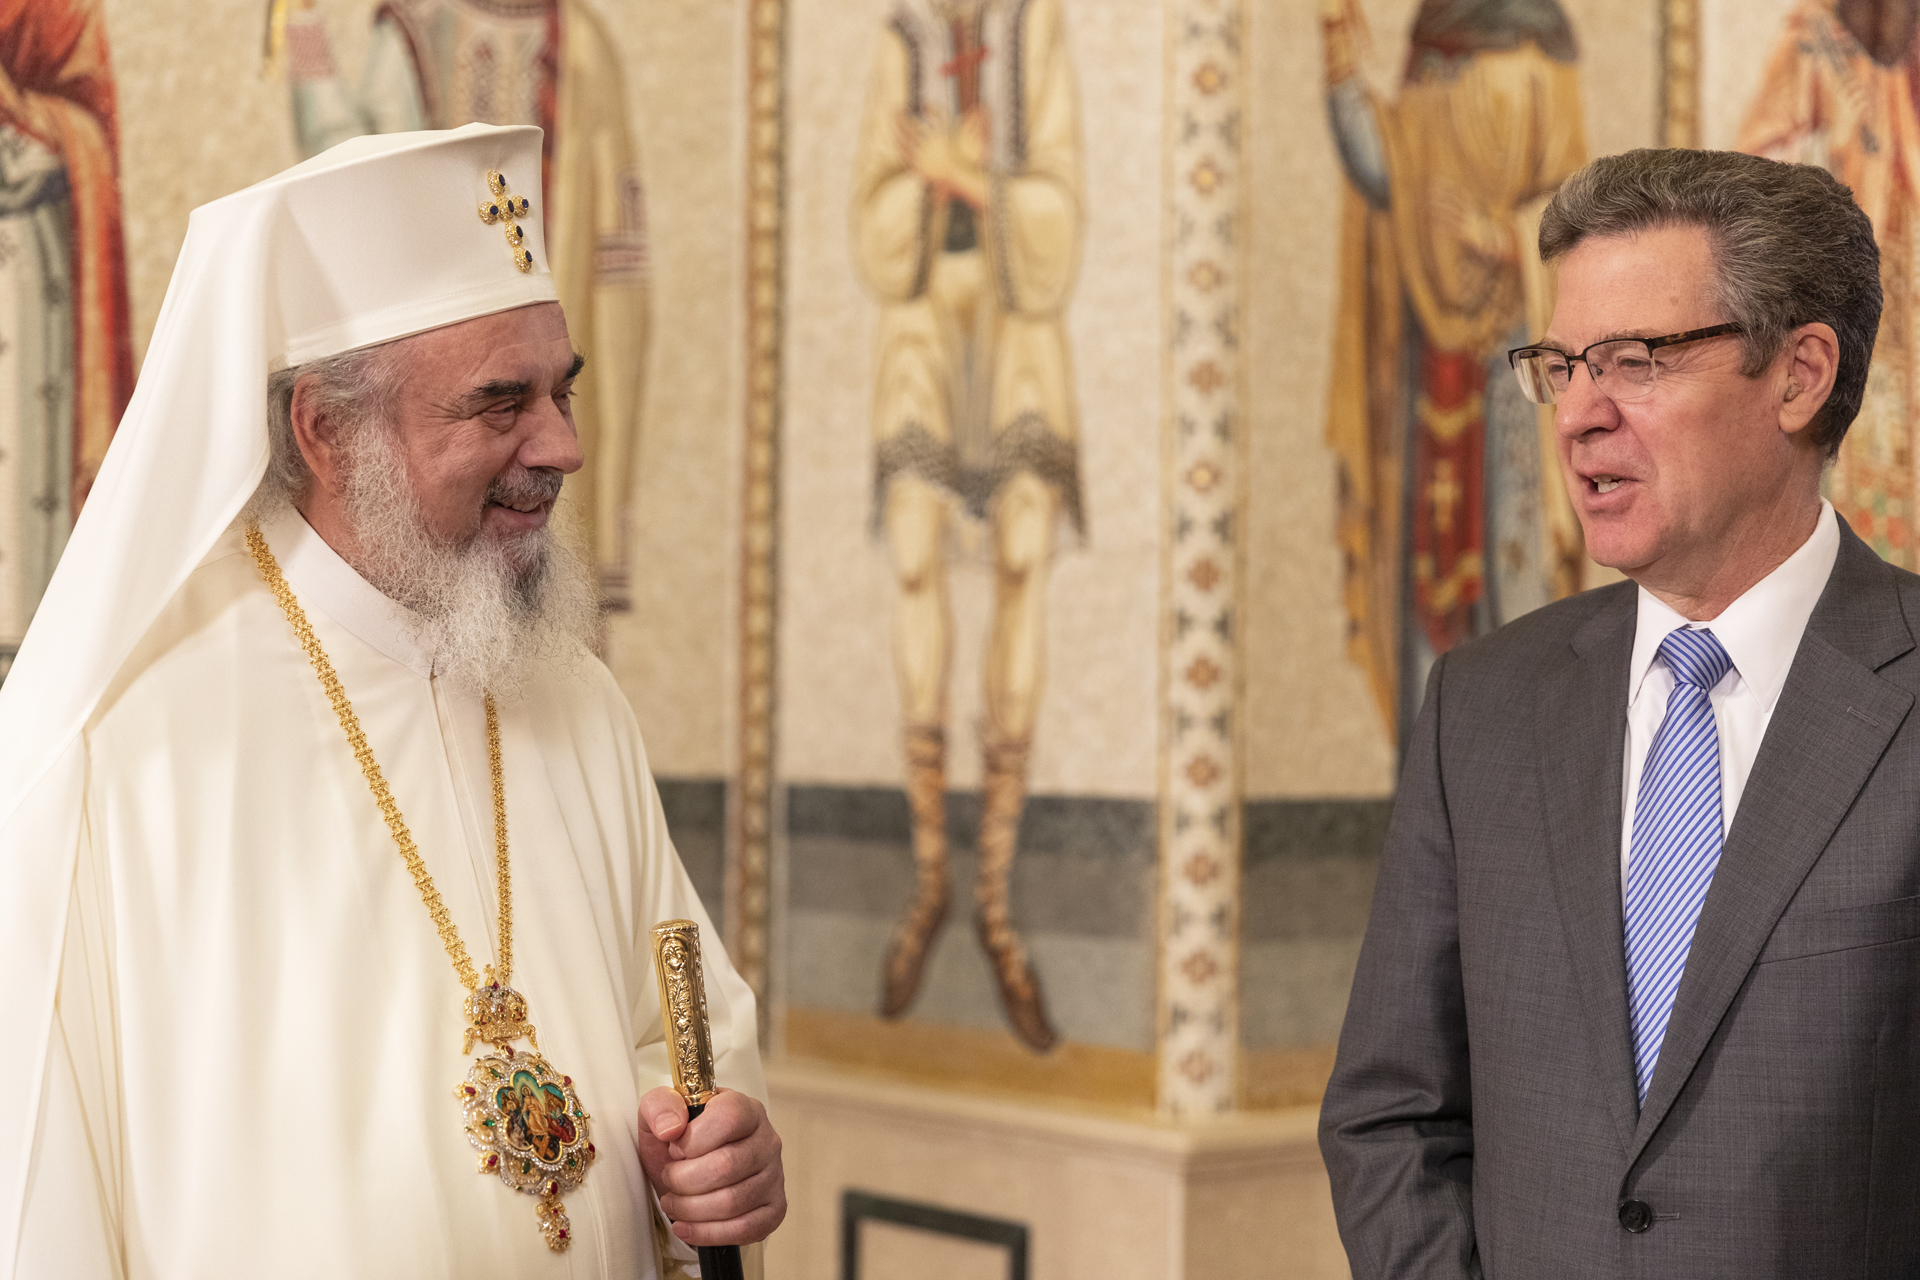 Patriarch daniel of romania received samuel brownback, the united states ambassador-at-large for international religious freedom